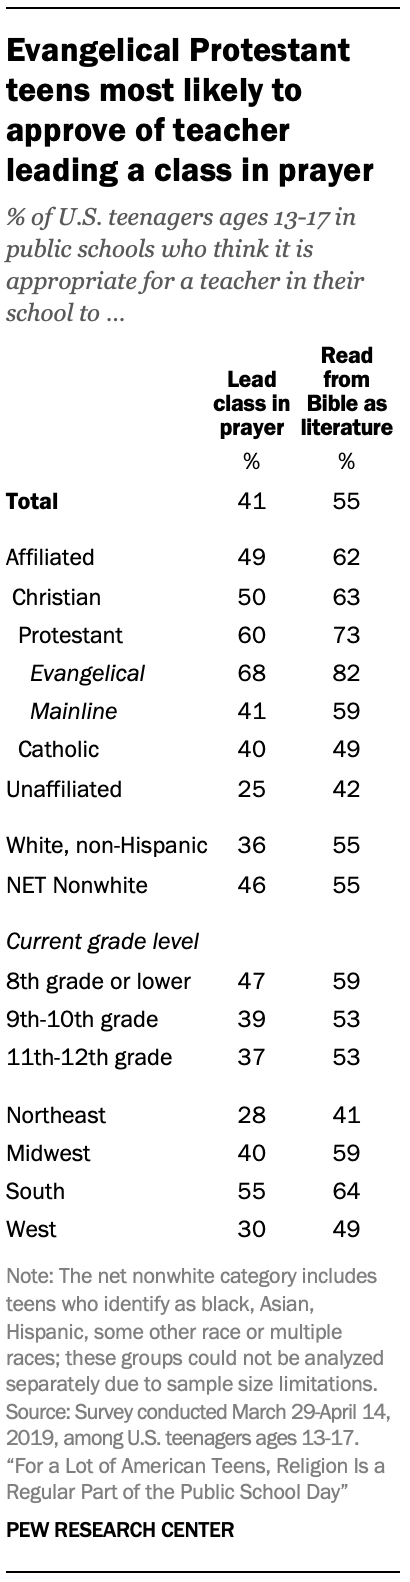 Evangelical Protestant teens most likely to approve of teacher leading a class in prayer